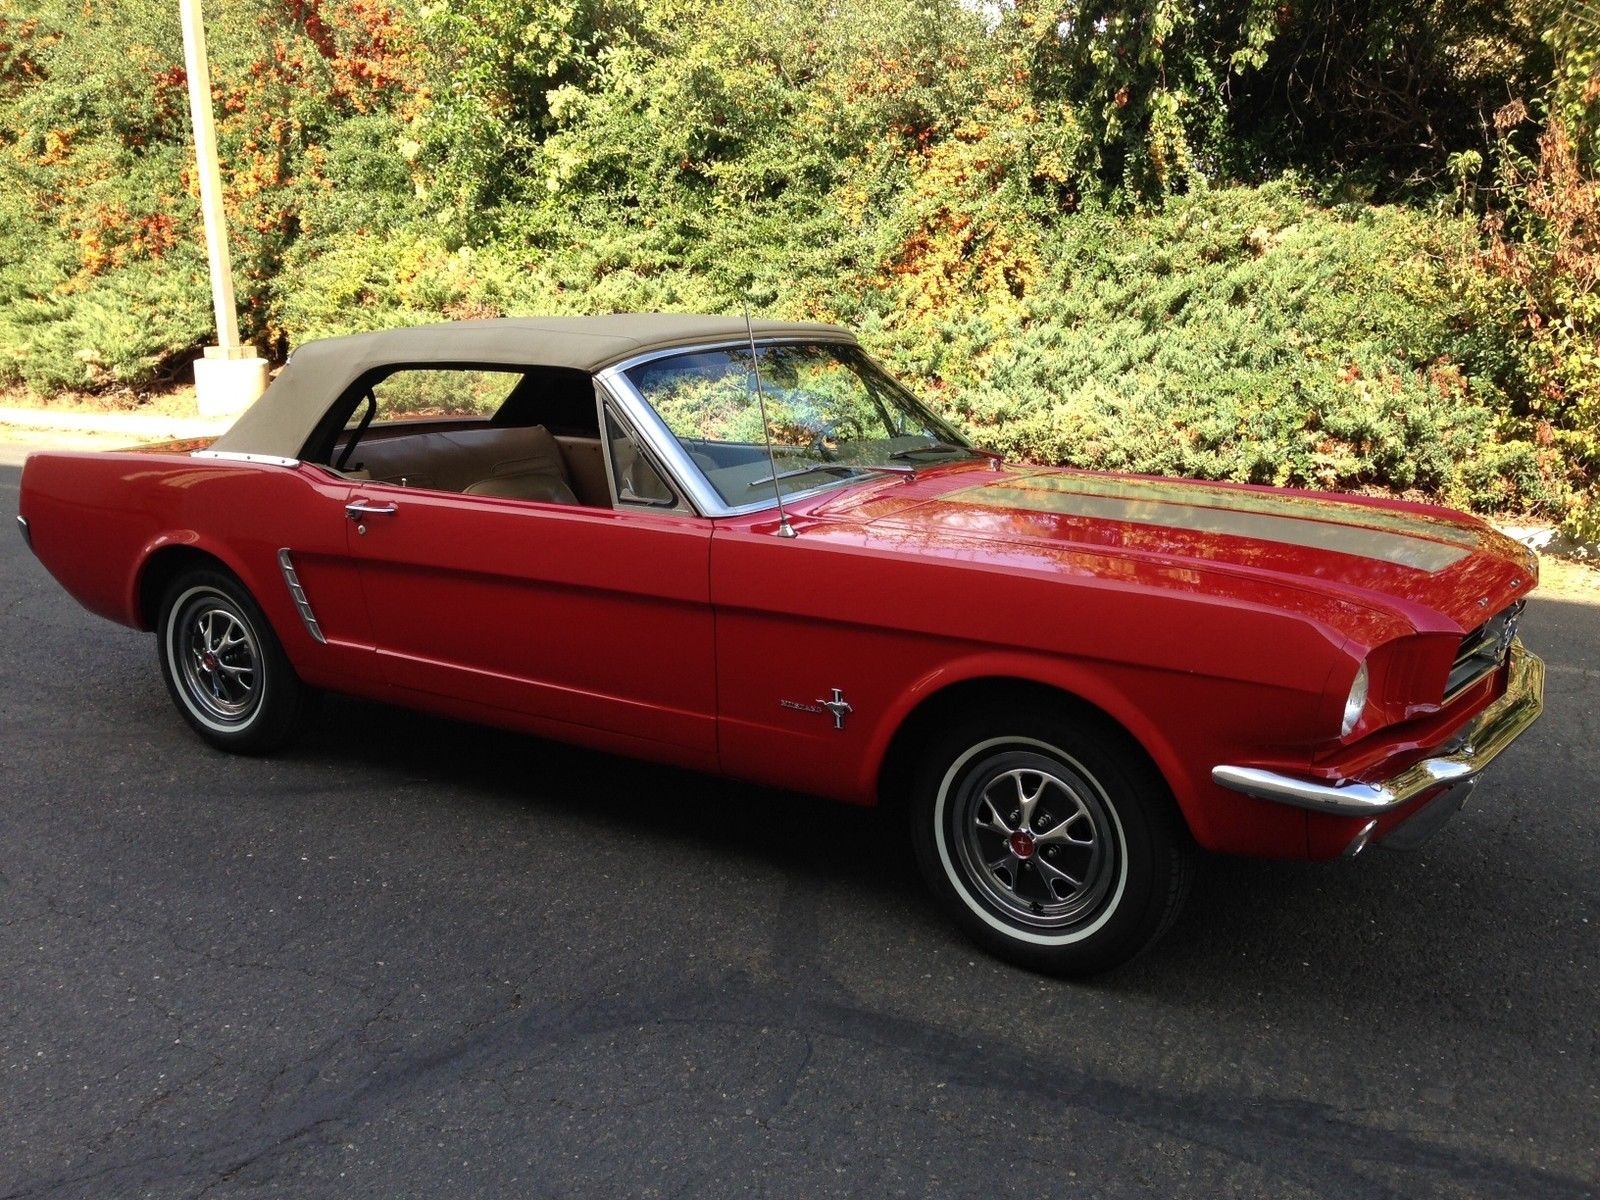 1964 1/2 Ford Mustang Convertible, Matching Numbers, Restored